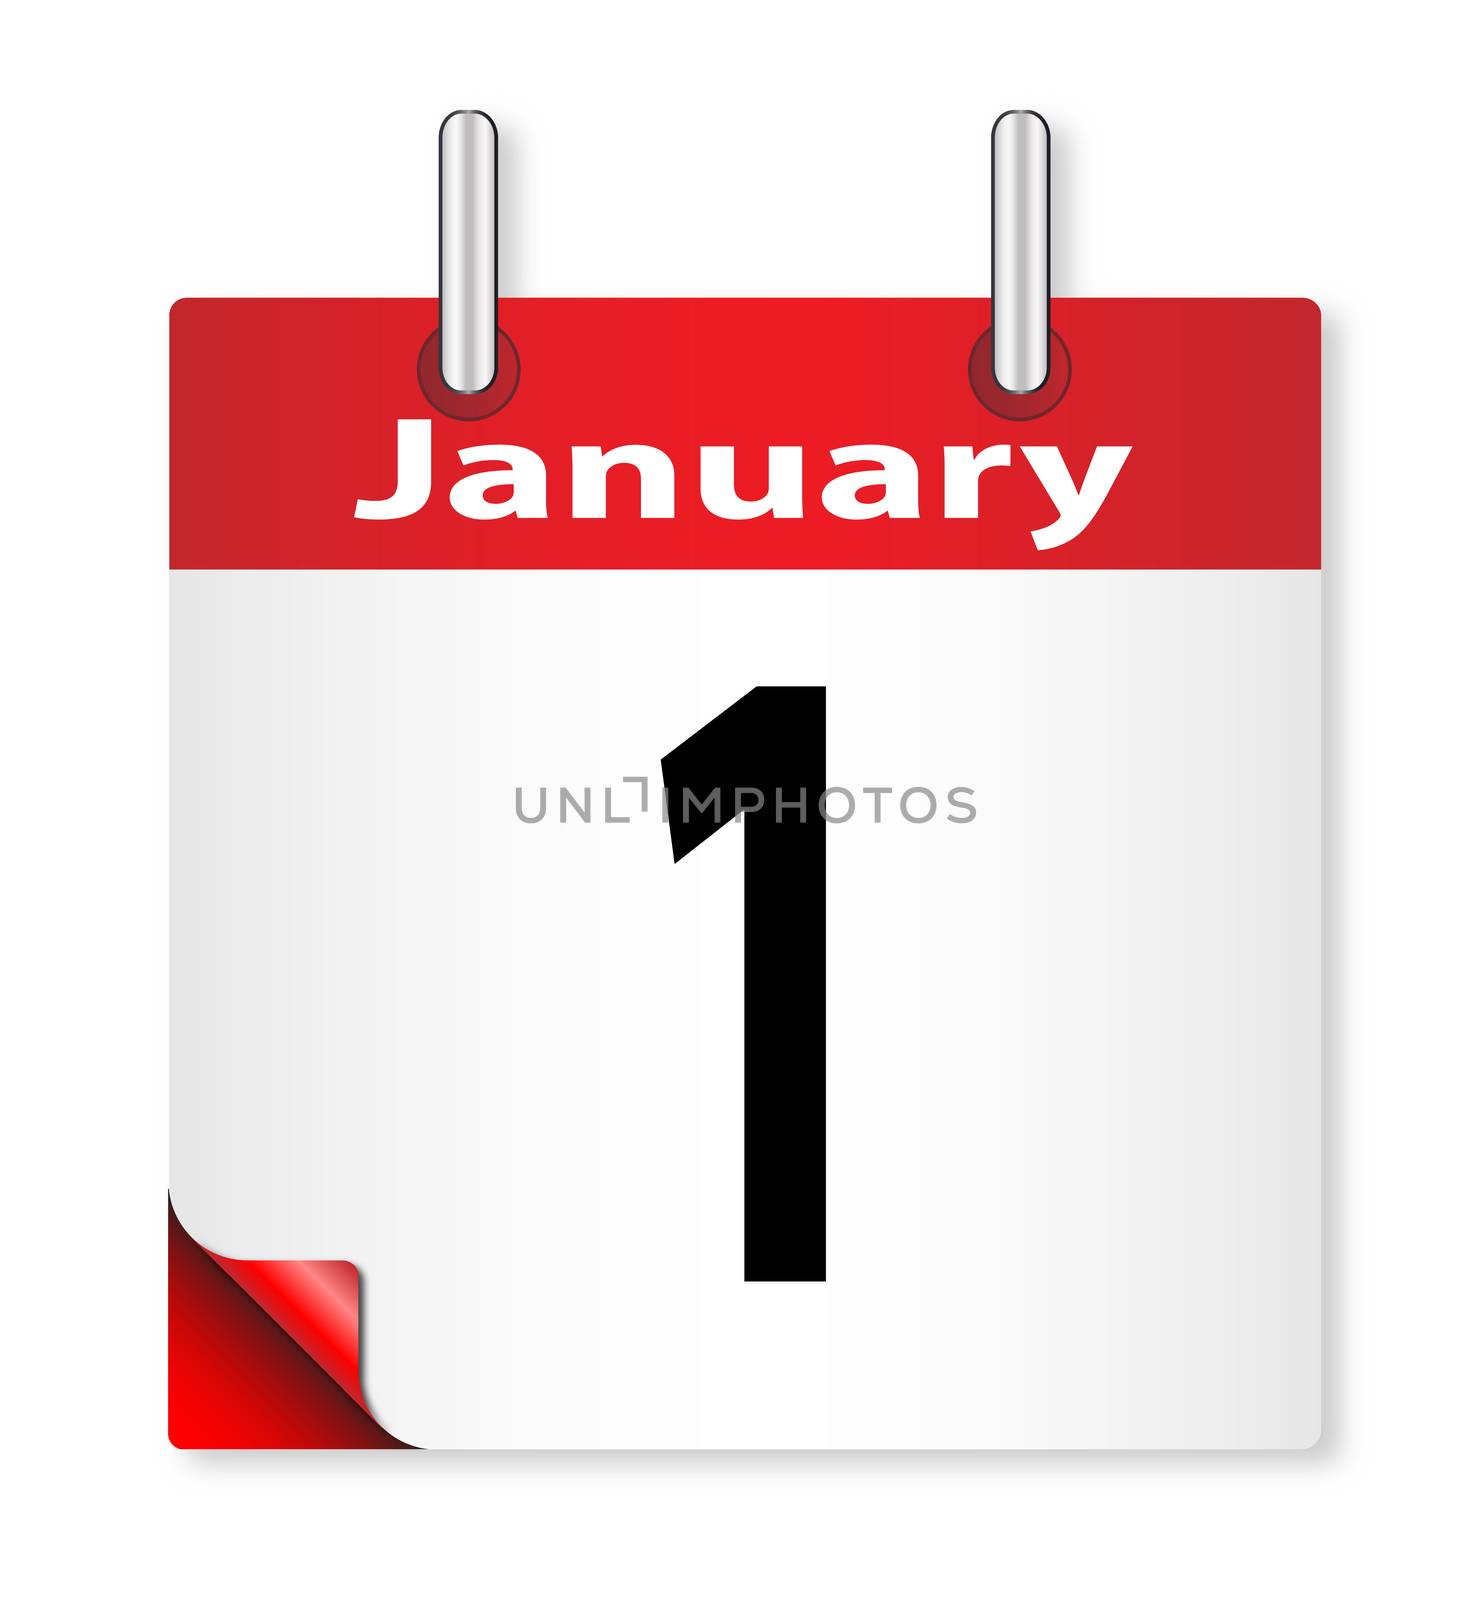 A calender date offering the 1st January